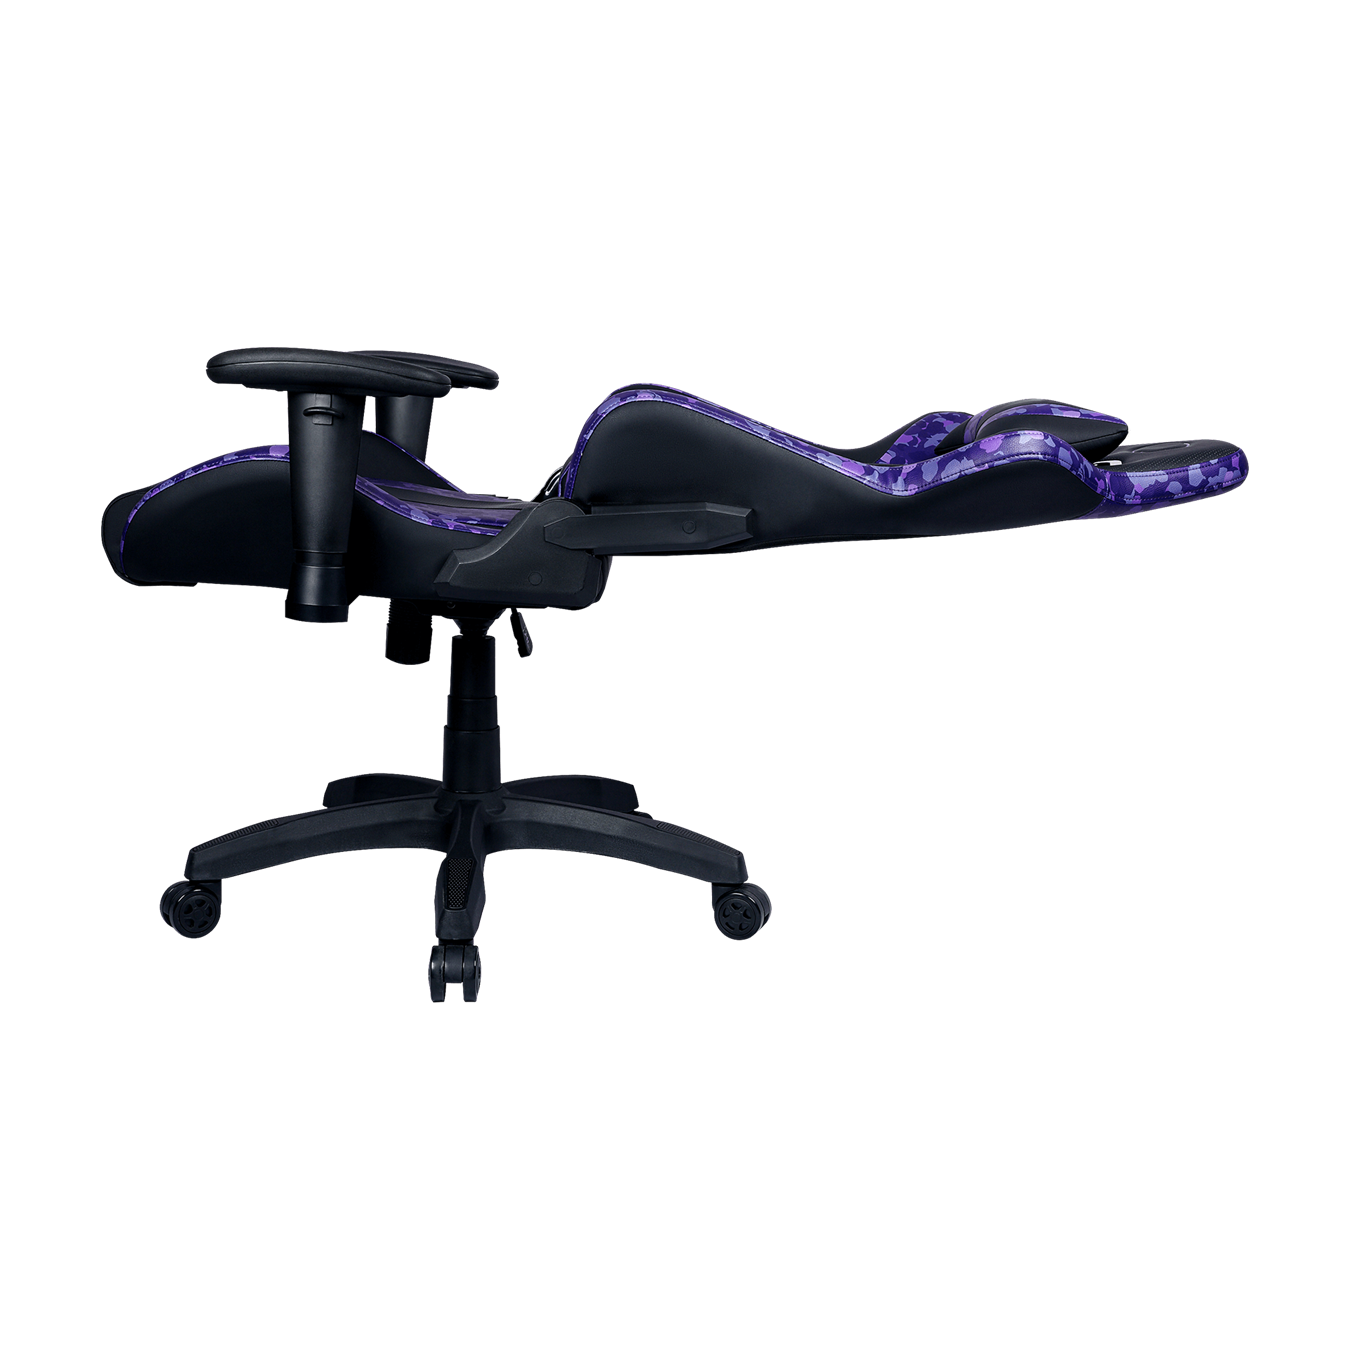 Caliber R1S CAMO Gaming Chair - Provides maximum comfort for all body types and keeps you feeling cool by allowing air flow and evaporation.